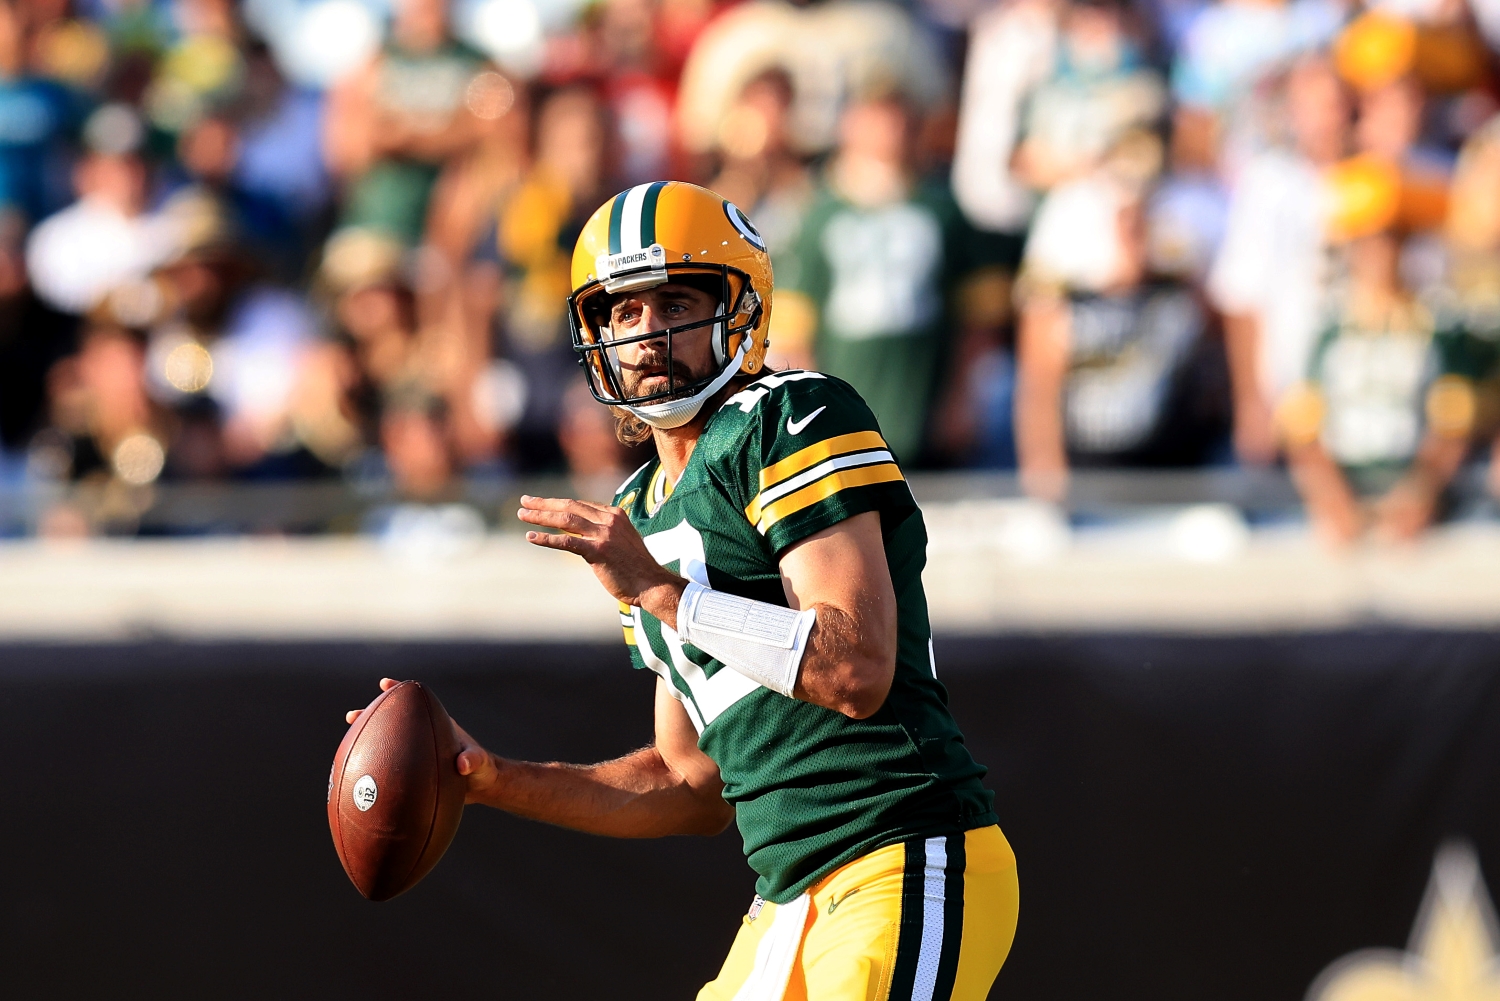 Green Bay Packers quarterback Aaron Rodgers gets ready to throw a pass against the New Orleans Saints.